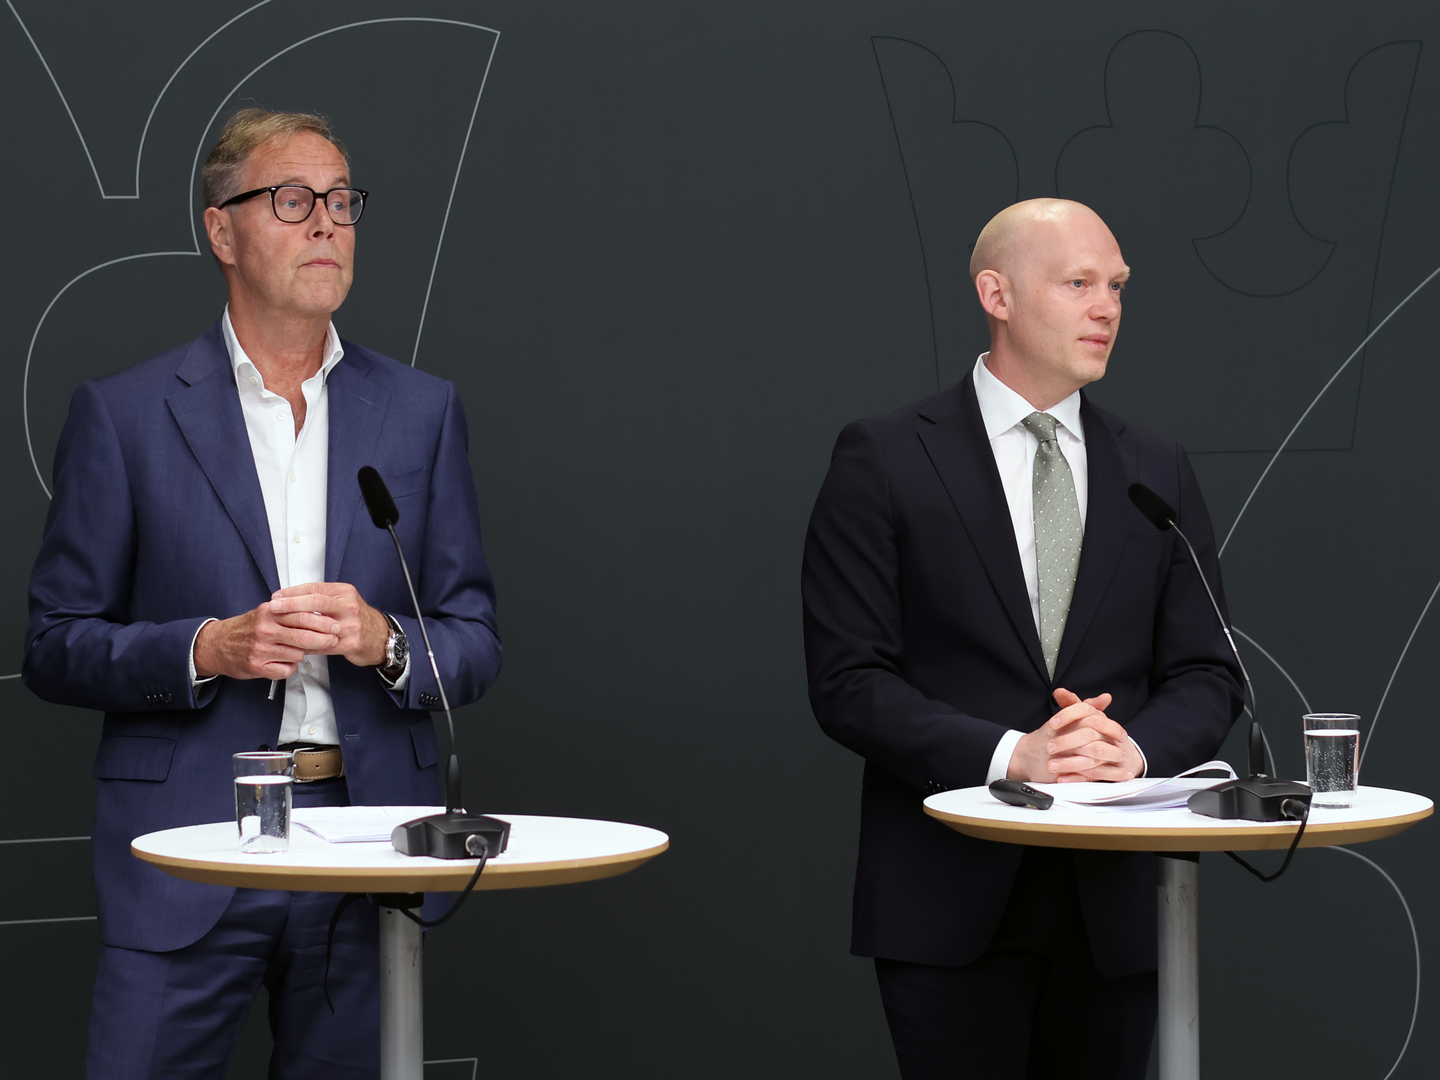 Tord Gransbo (left) and government minister Niklas Wykman at Monday's press briefing on the AP buffer funds. | Photo: Regeringskansliet / PR